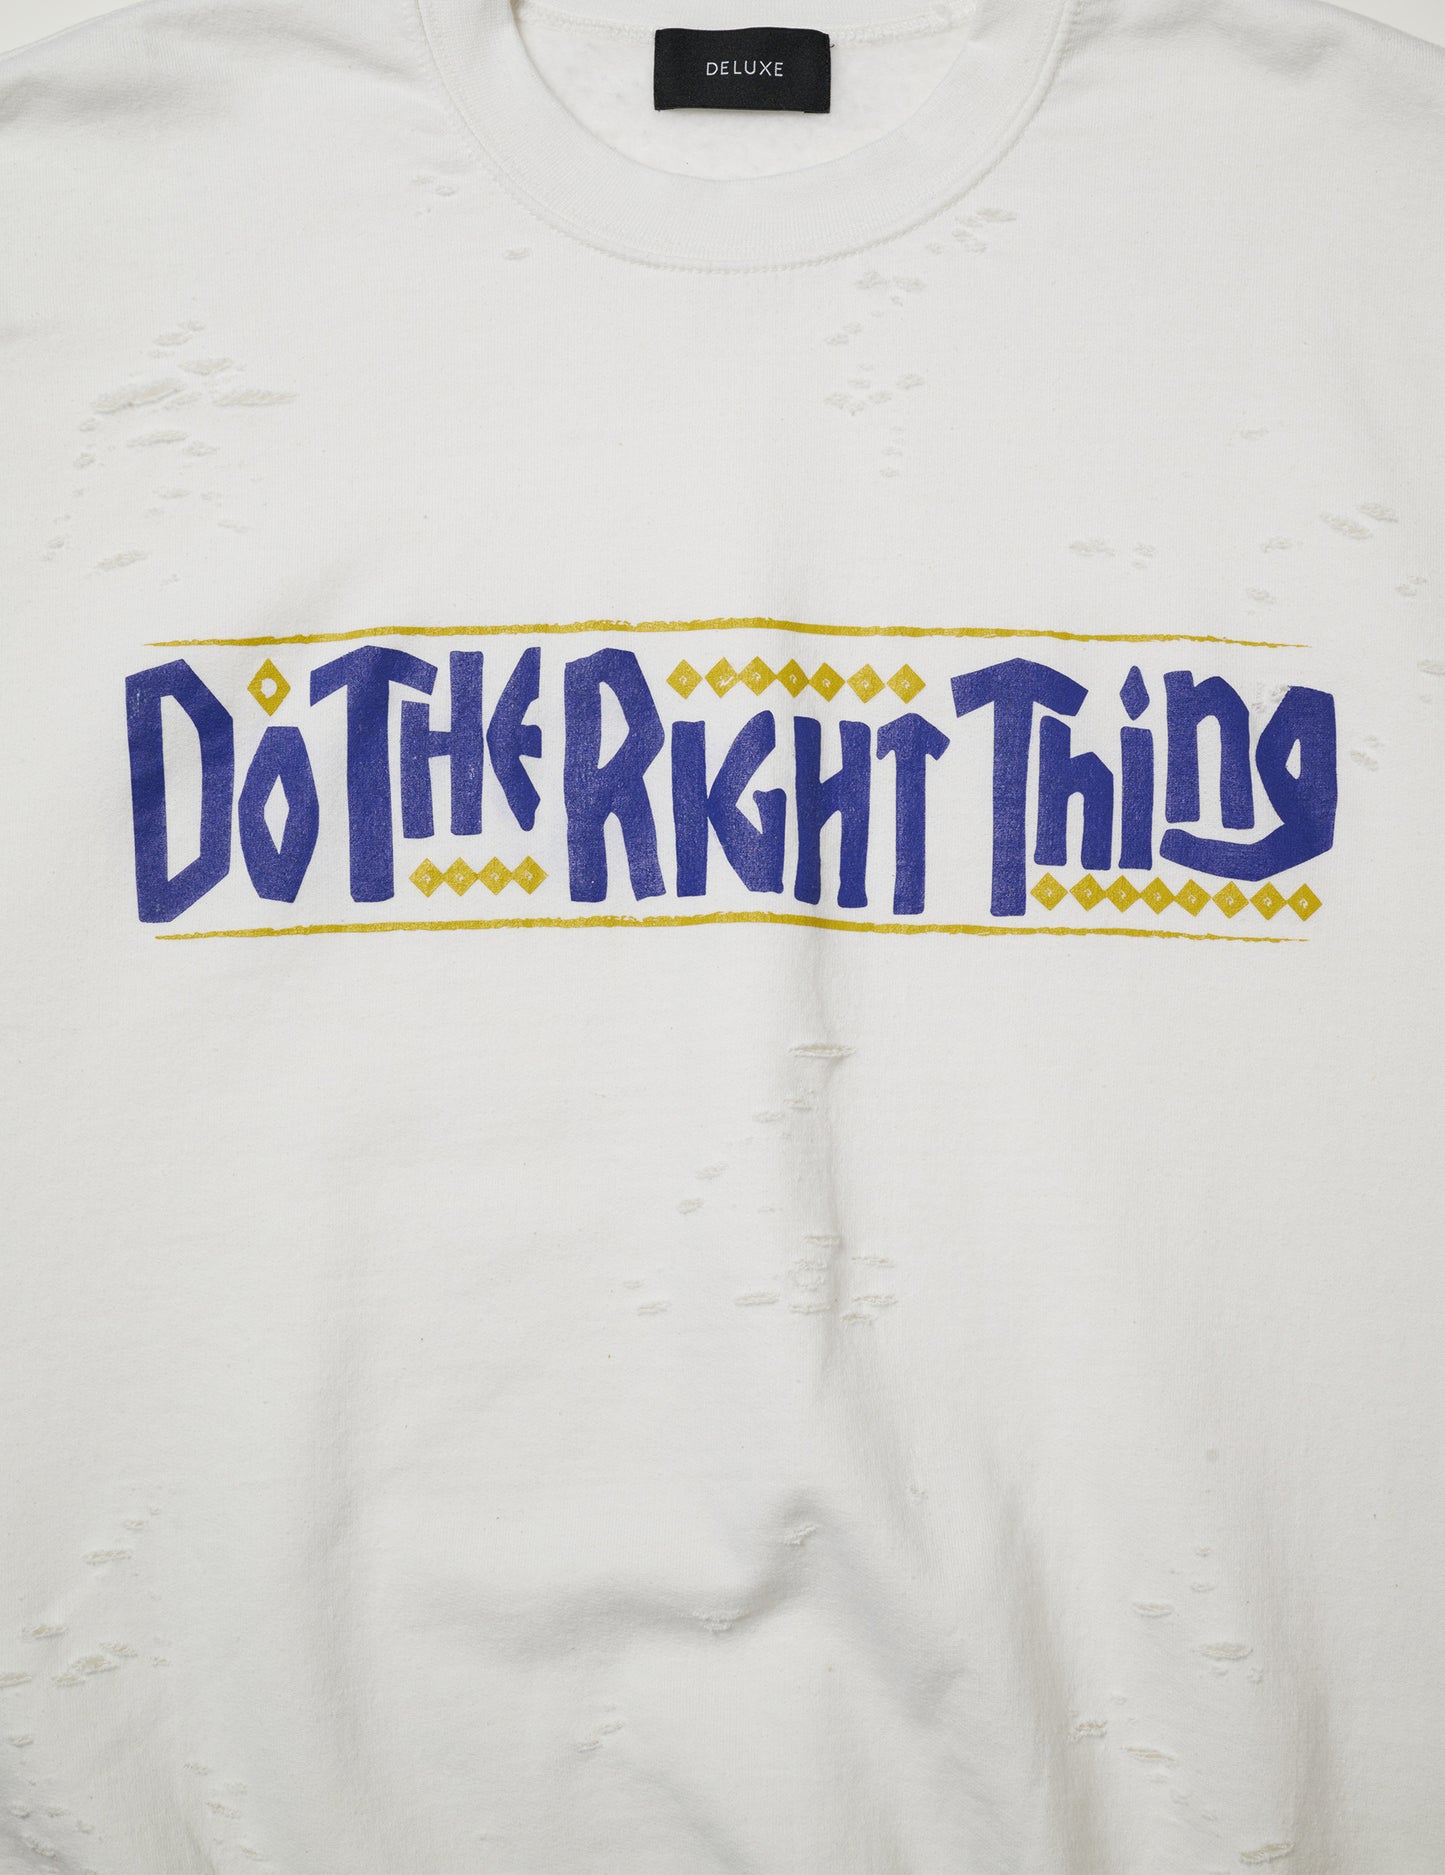 Do the right thing x DELUXE CREW BLACK